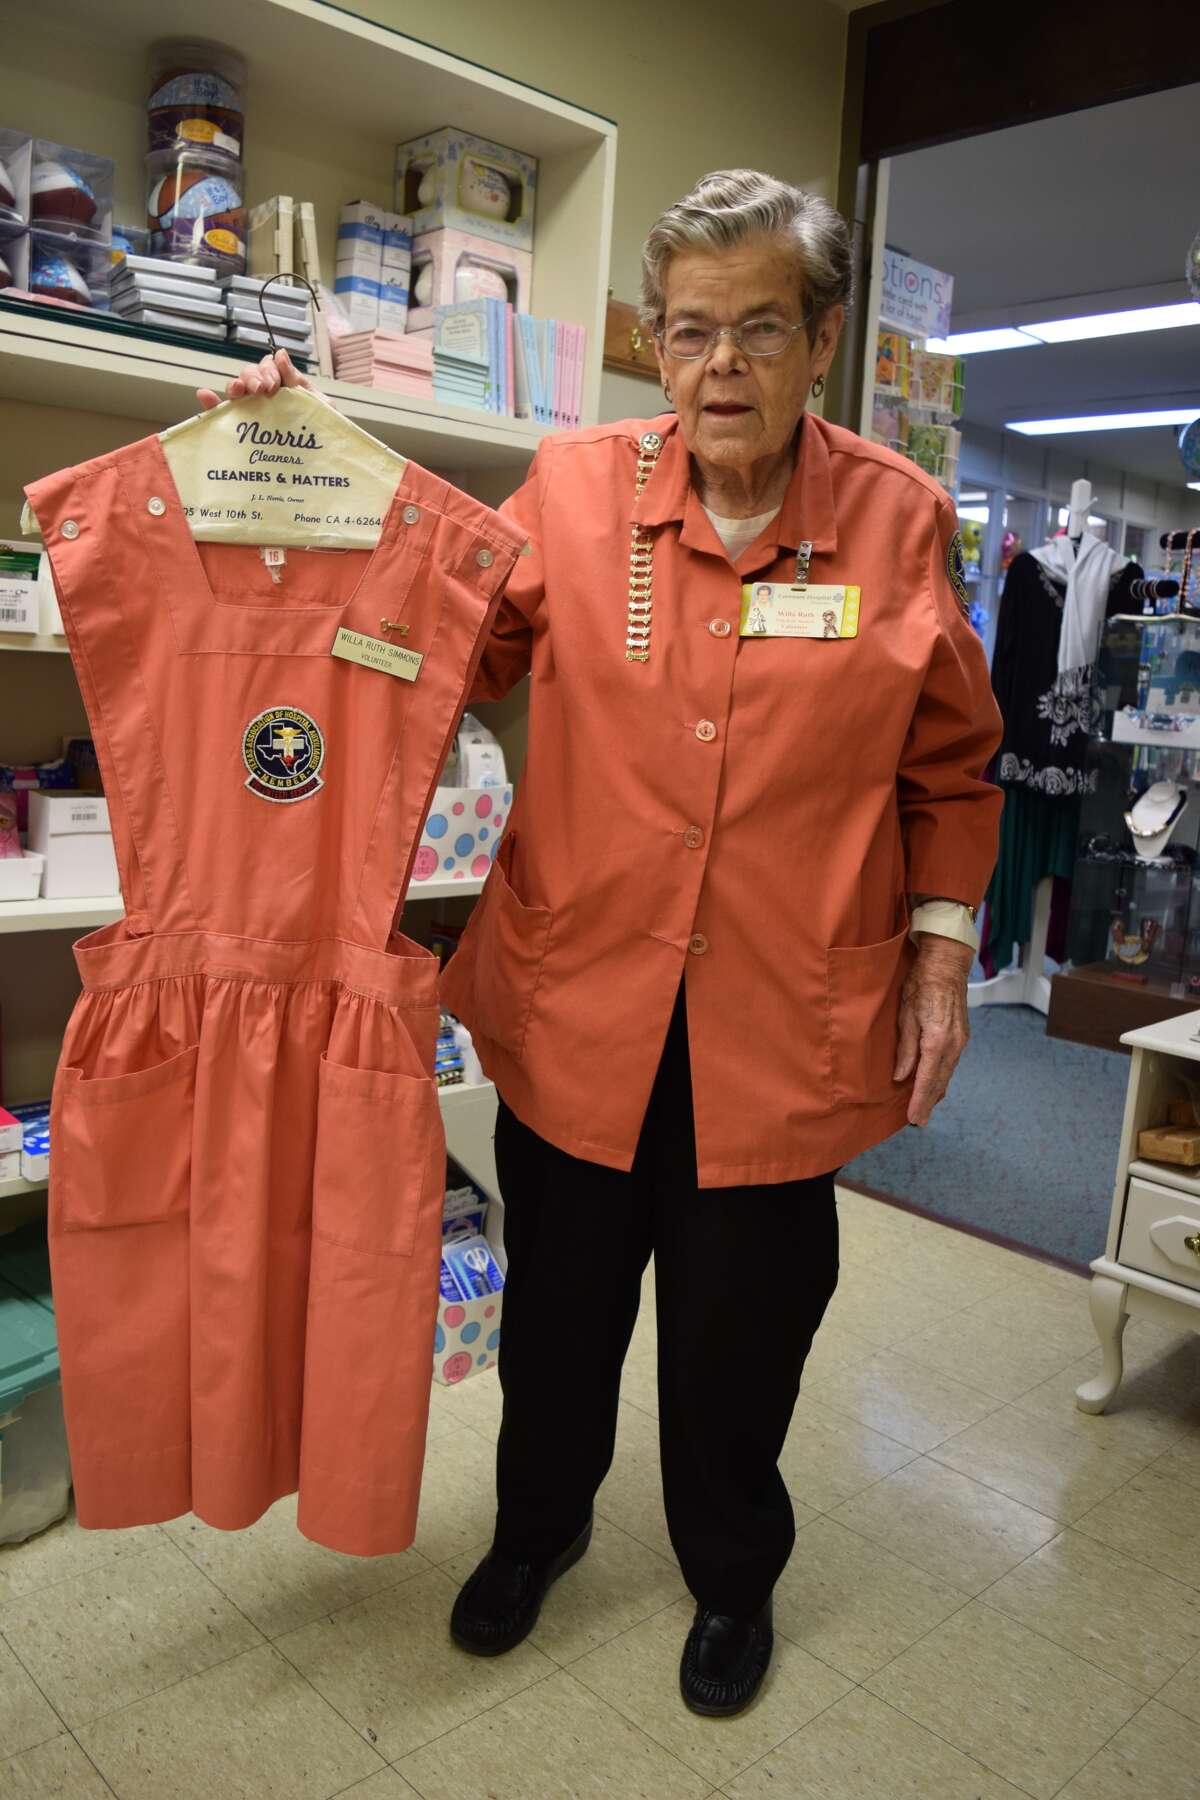 Longtime Hospital Auxiliary member Willa Ruth Simmons displays an old Pink Lady’s uniform while wearing her more modern smock. She has volunteered at the hospital for almost 50 years.